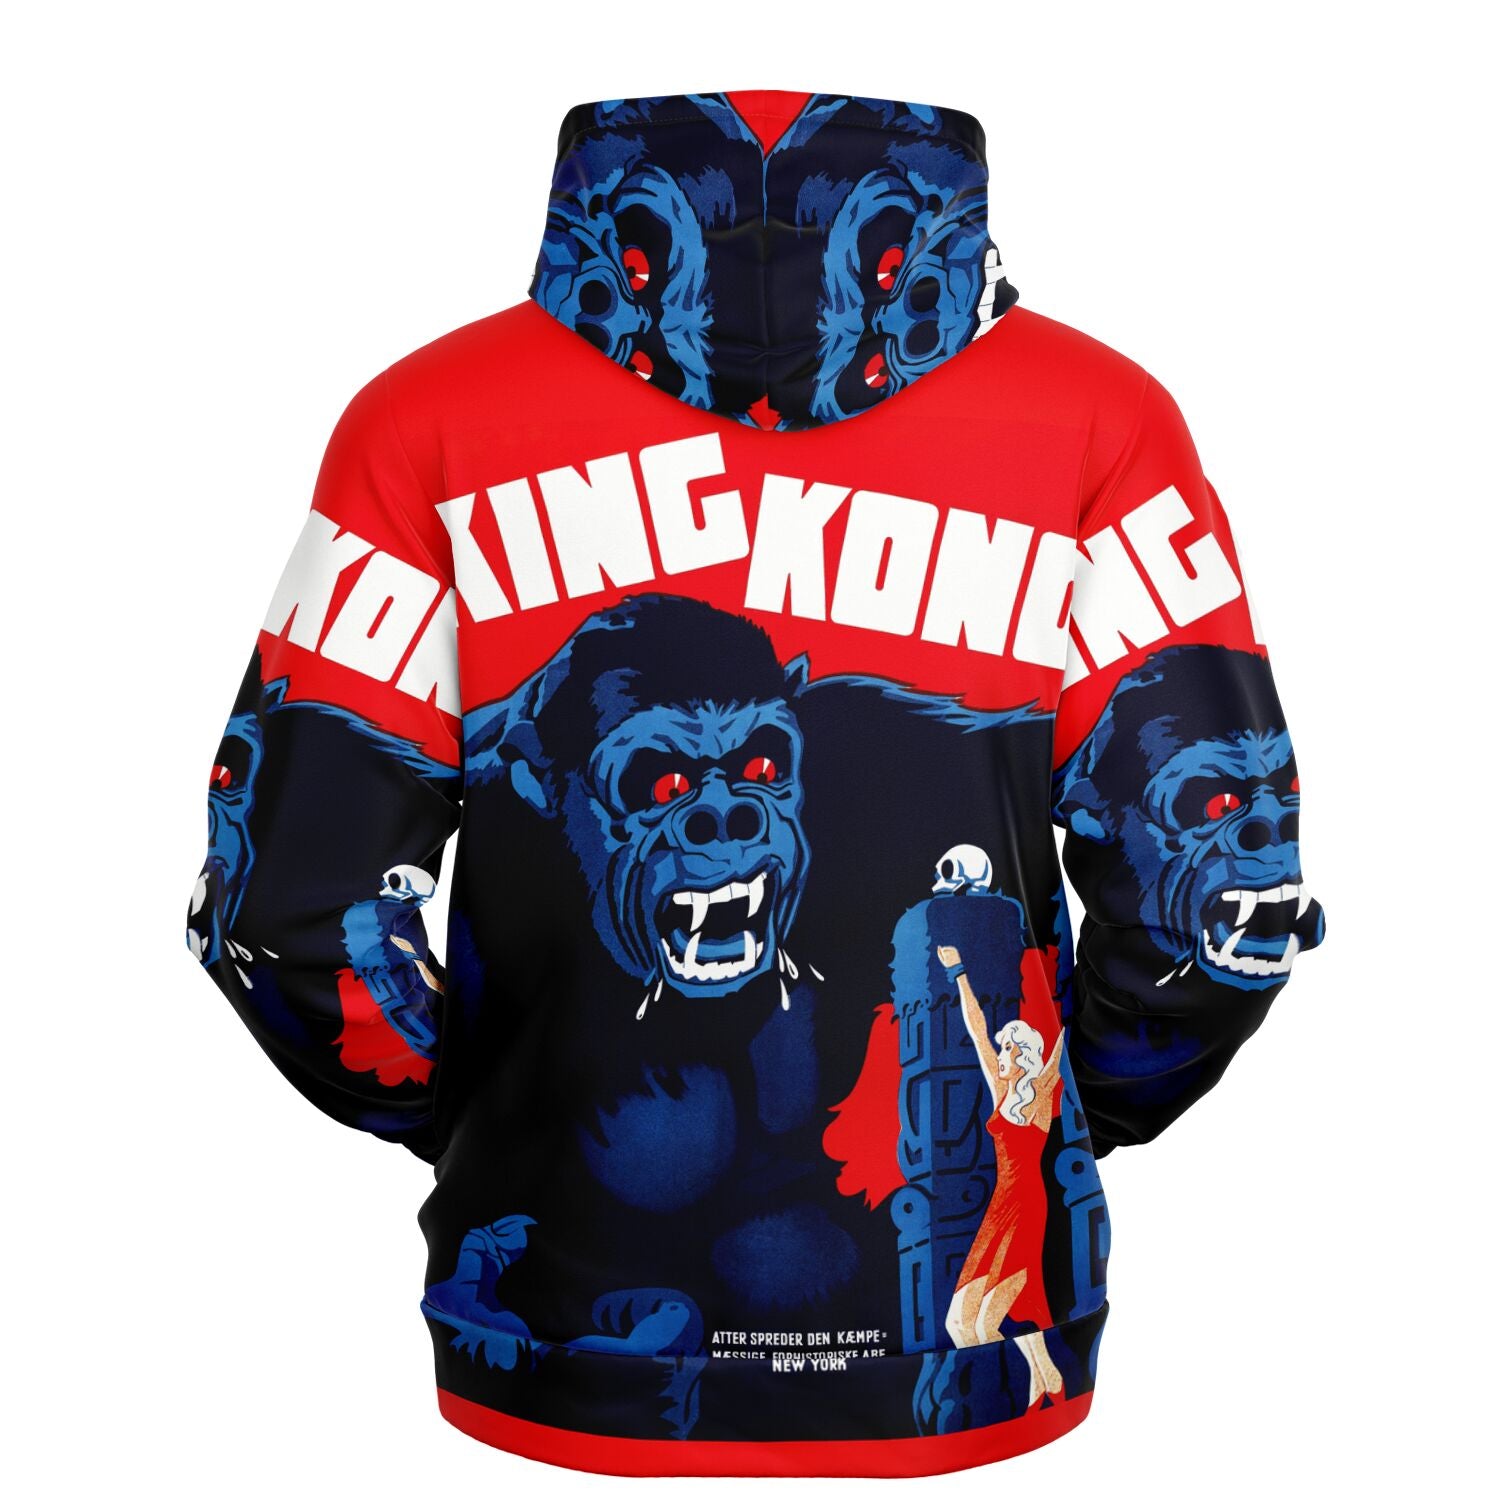 King Kong Retro Hoodie Feat Vintage Graphics